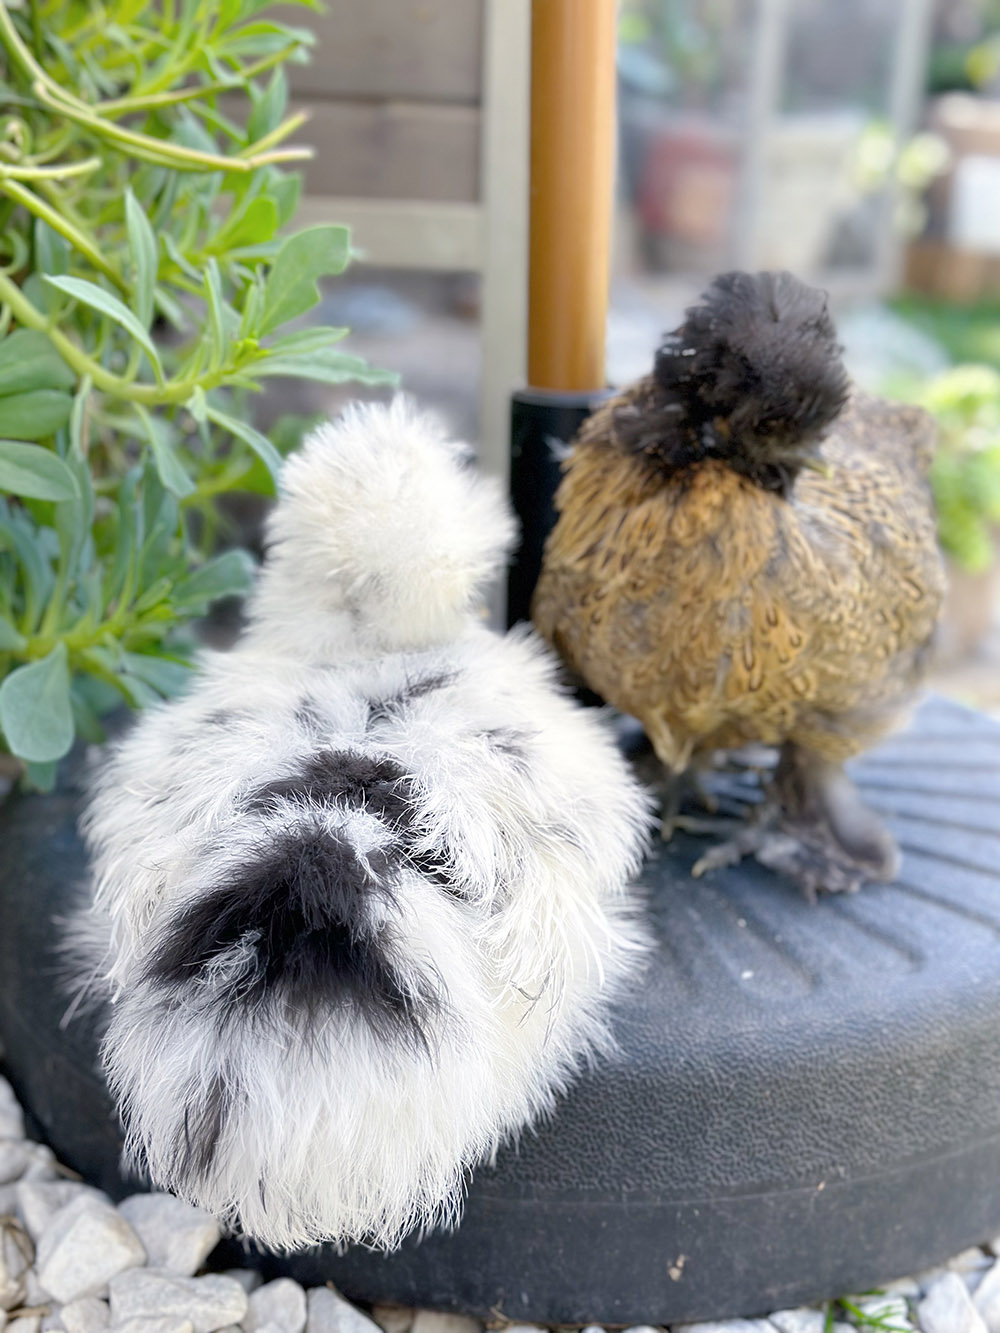 Baby silkie chickens